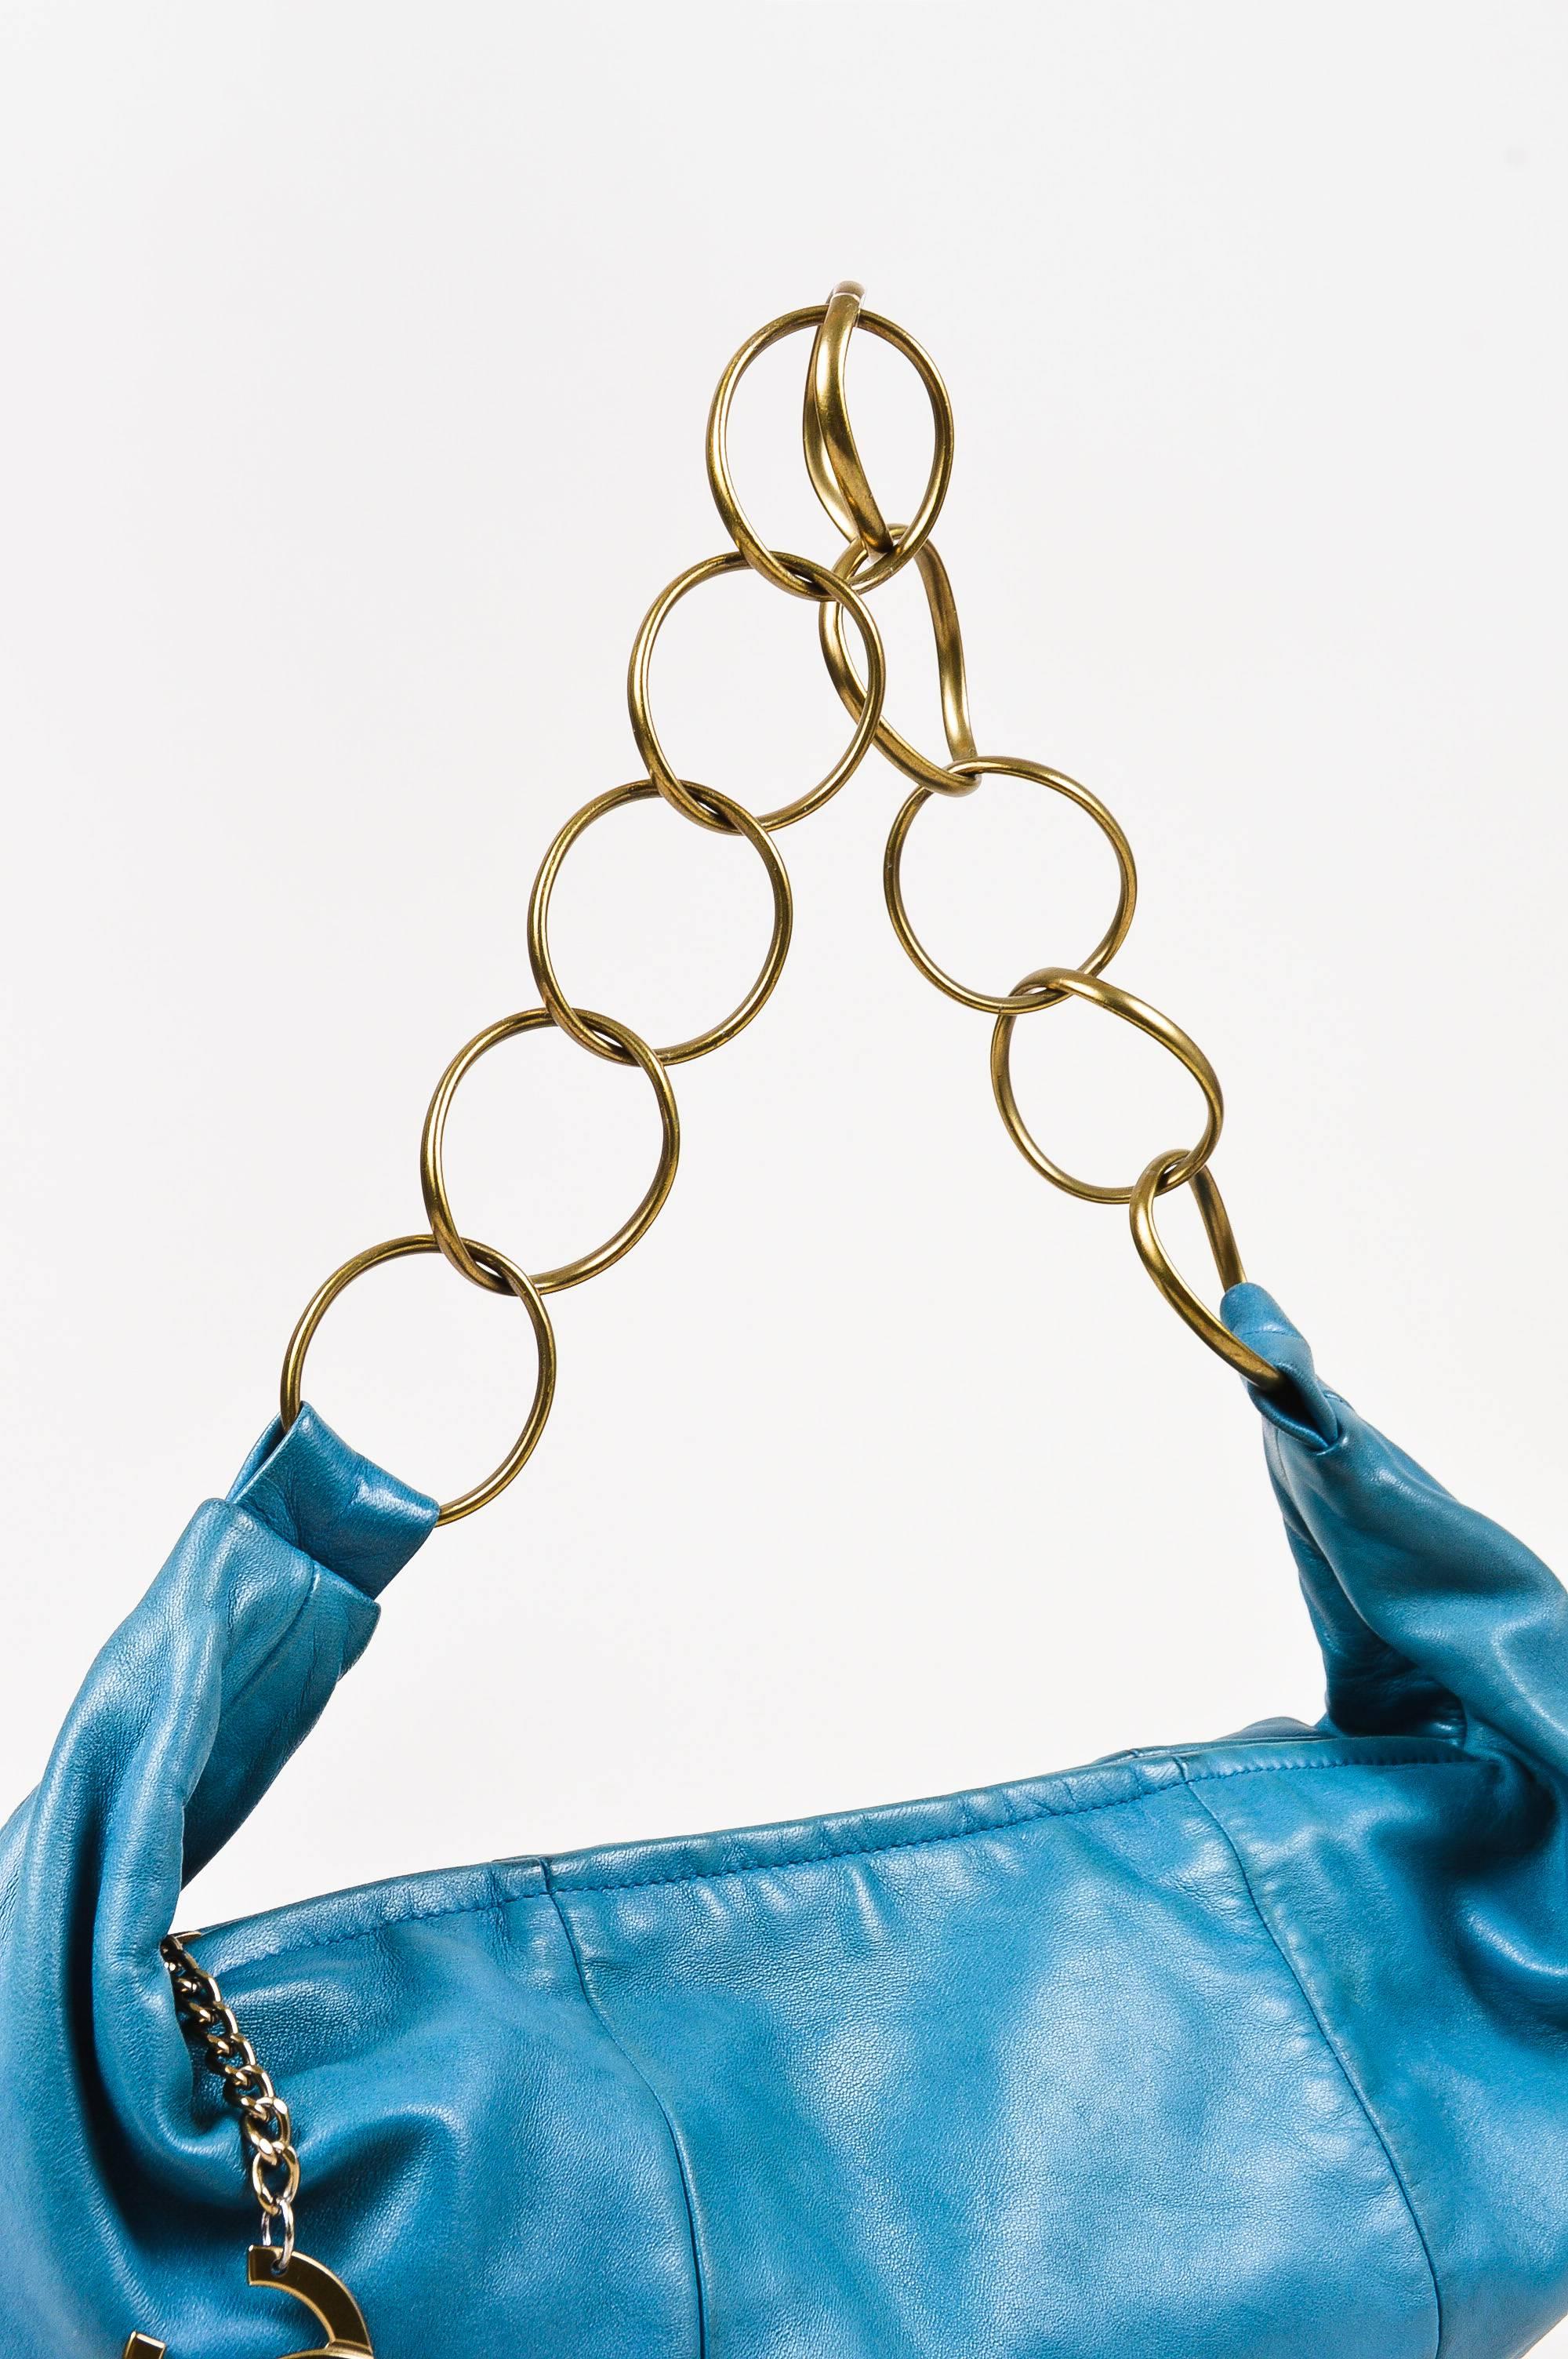 Women's Chanel Teal Leather Bronze Tone 'CC' Ring Hobo Bag For Sale